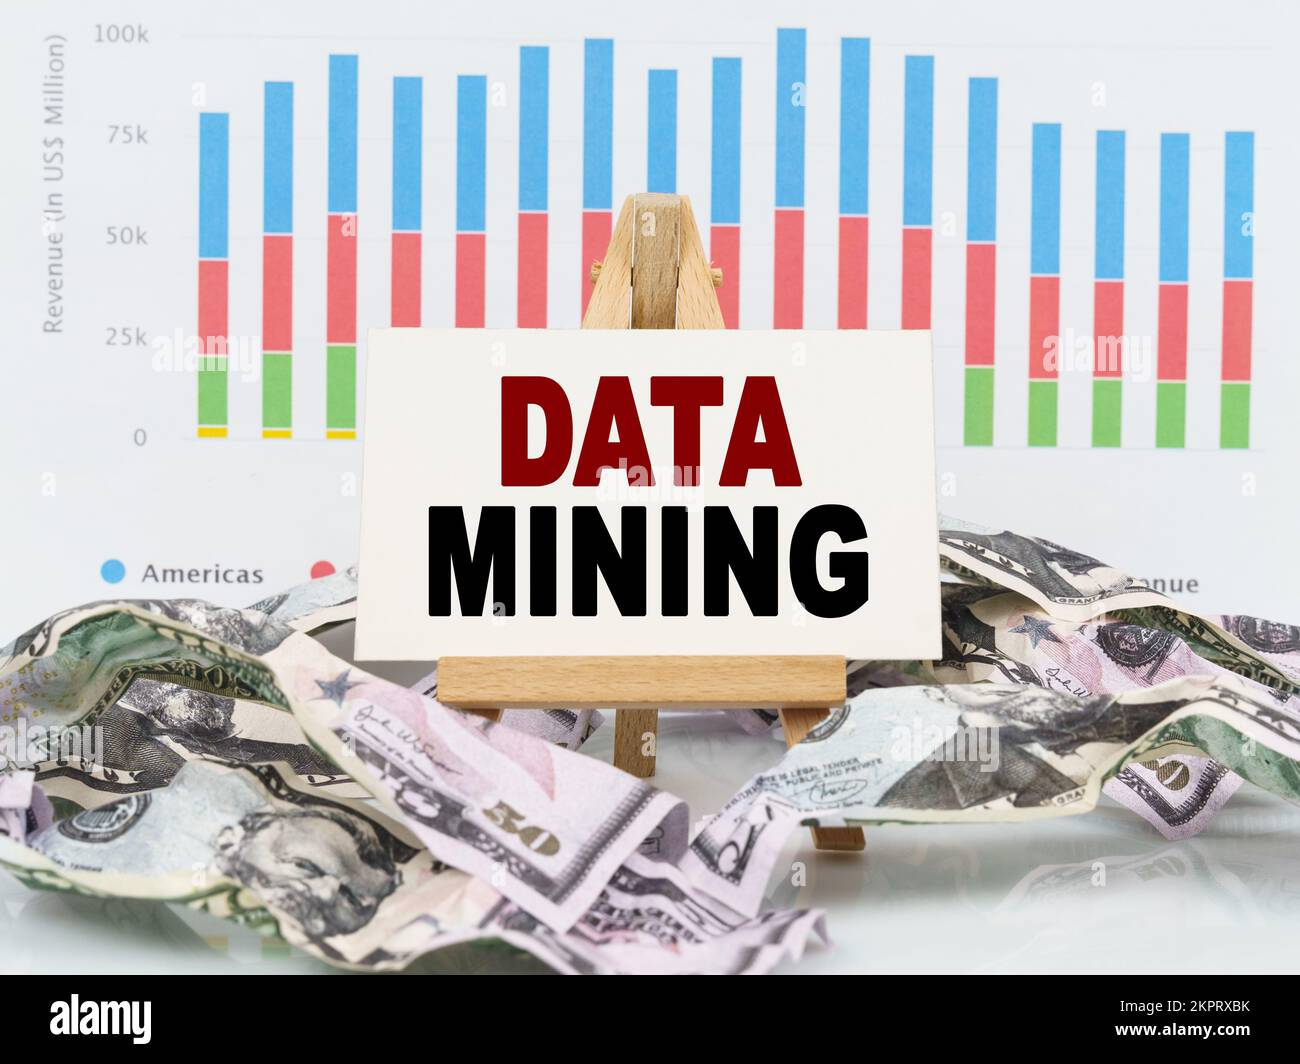 Business and finance concept. Among financial charts and money is a sign with the text - DATA MINING Stock Photo